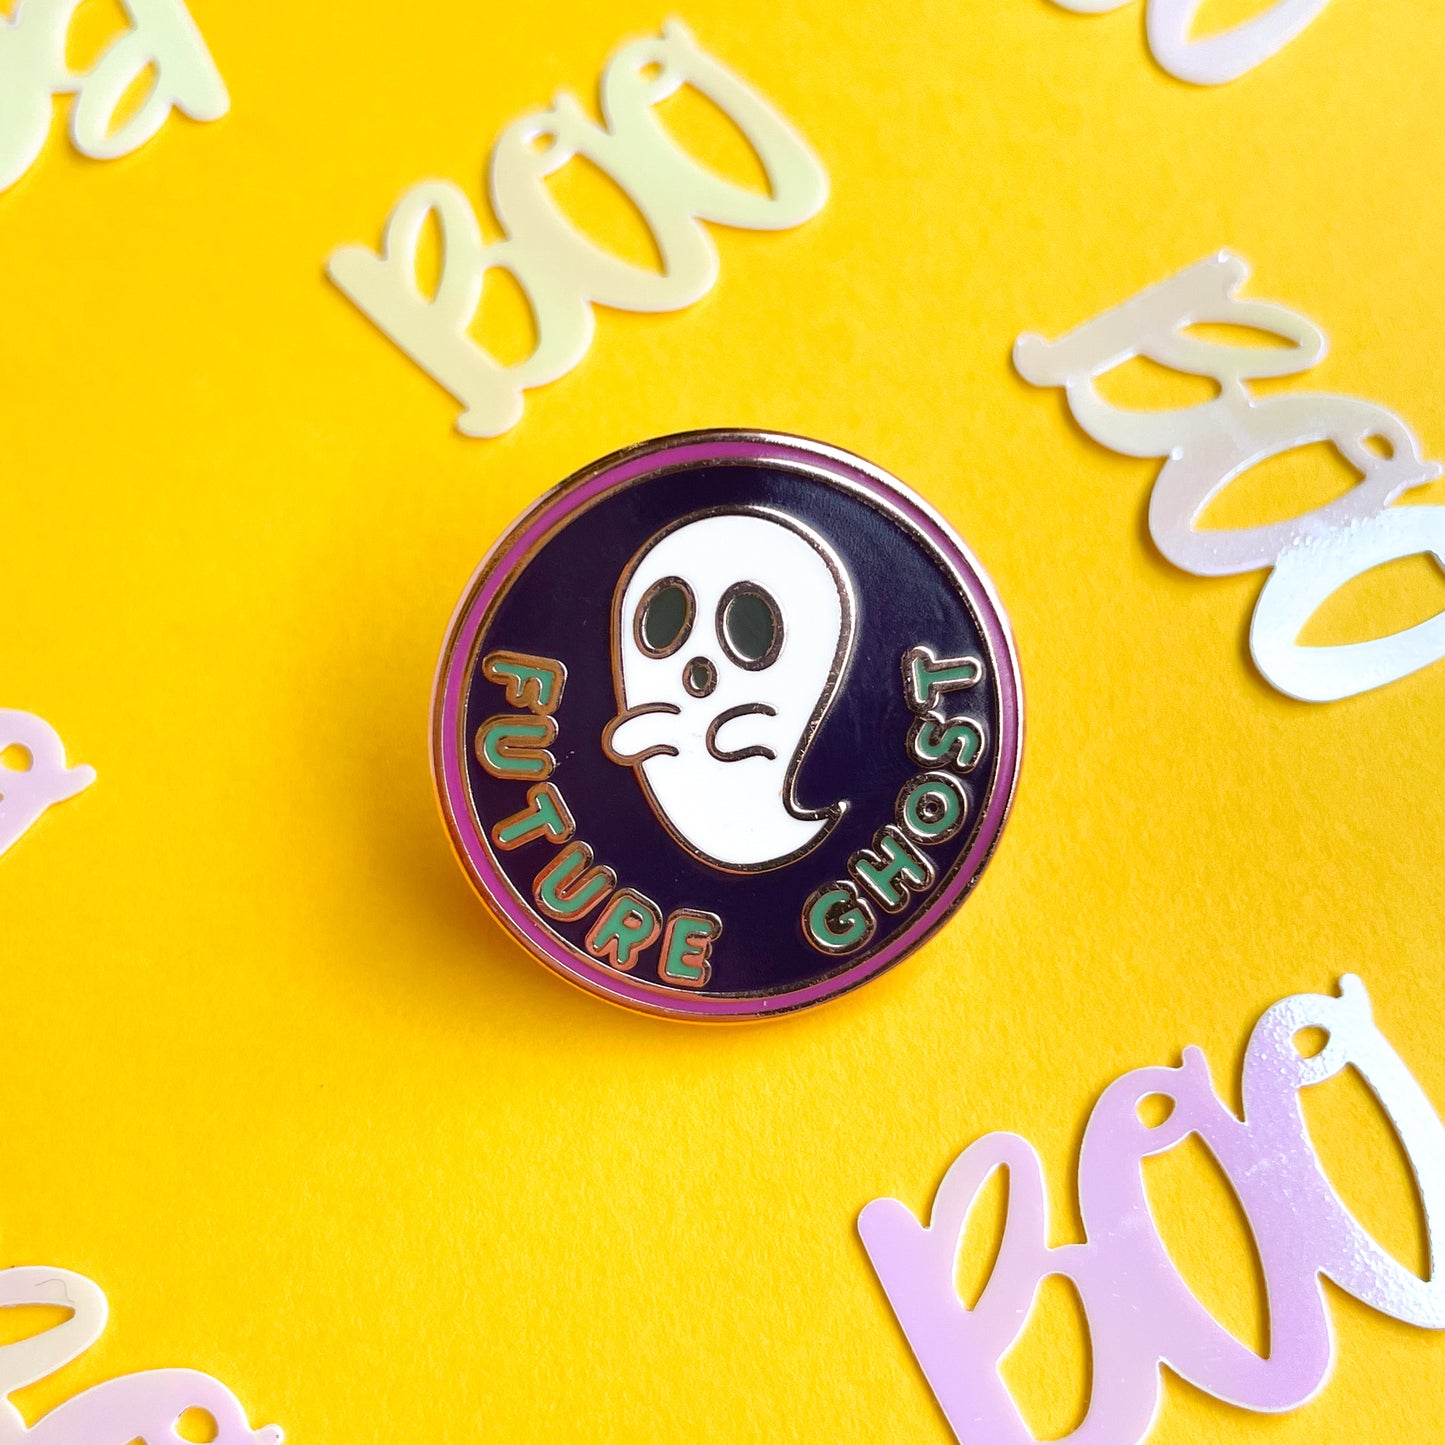 An circular enamel pin with a ghost on it that reads "Future Ghost" on a yellow background.